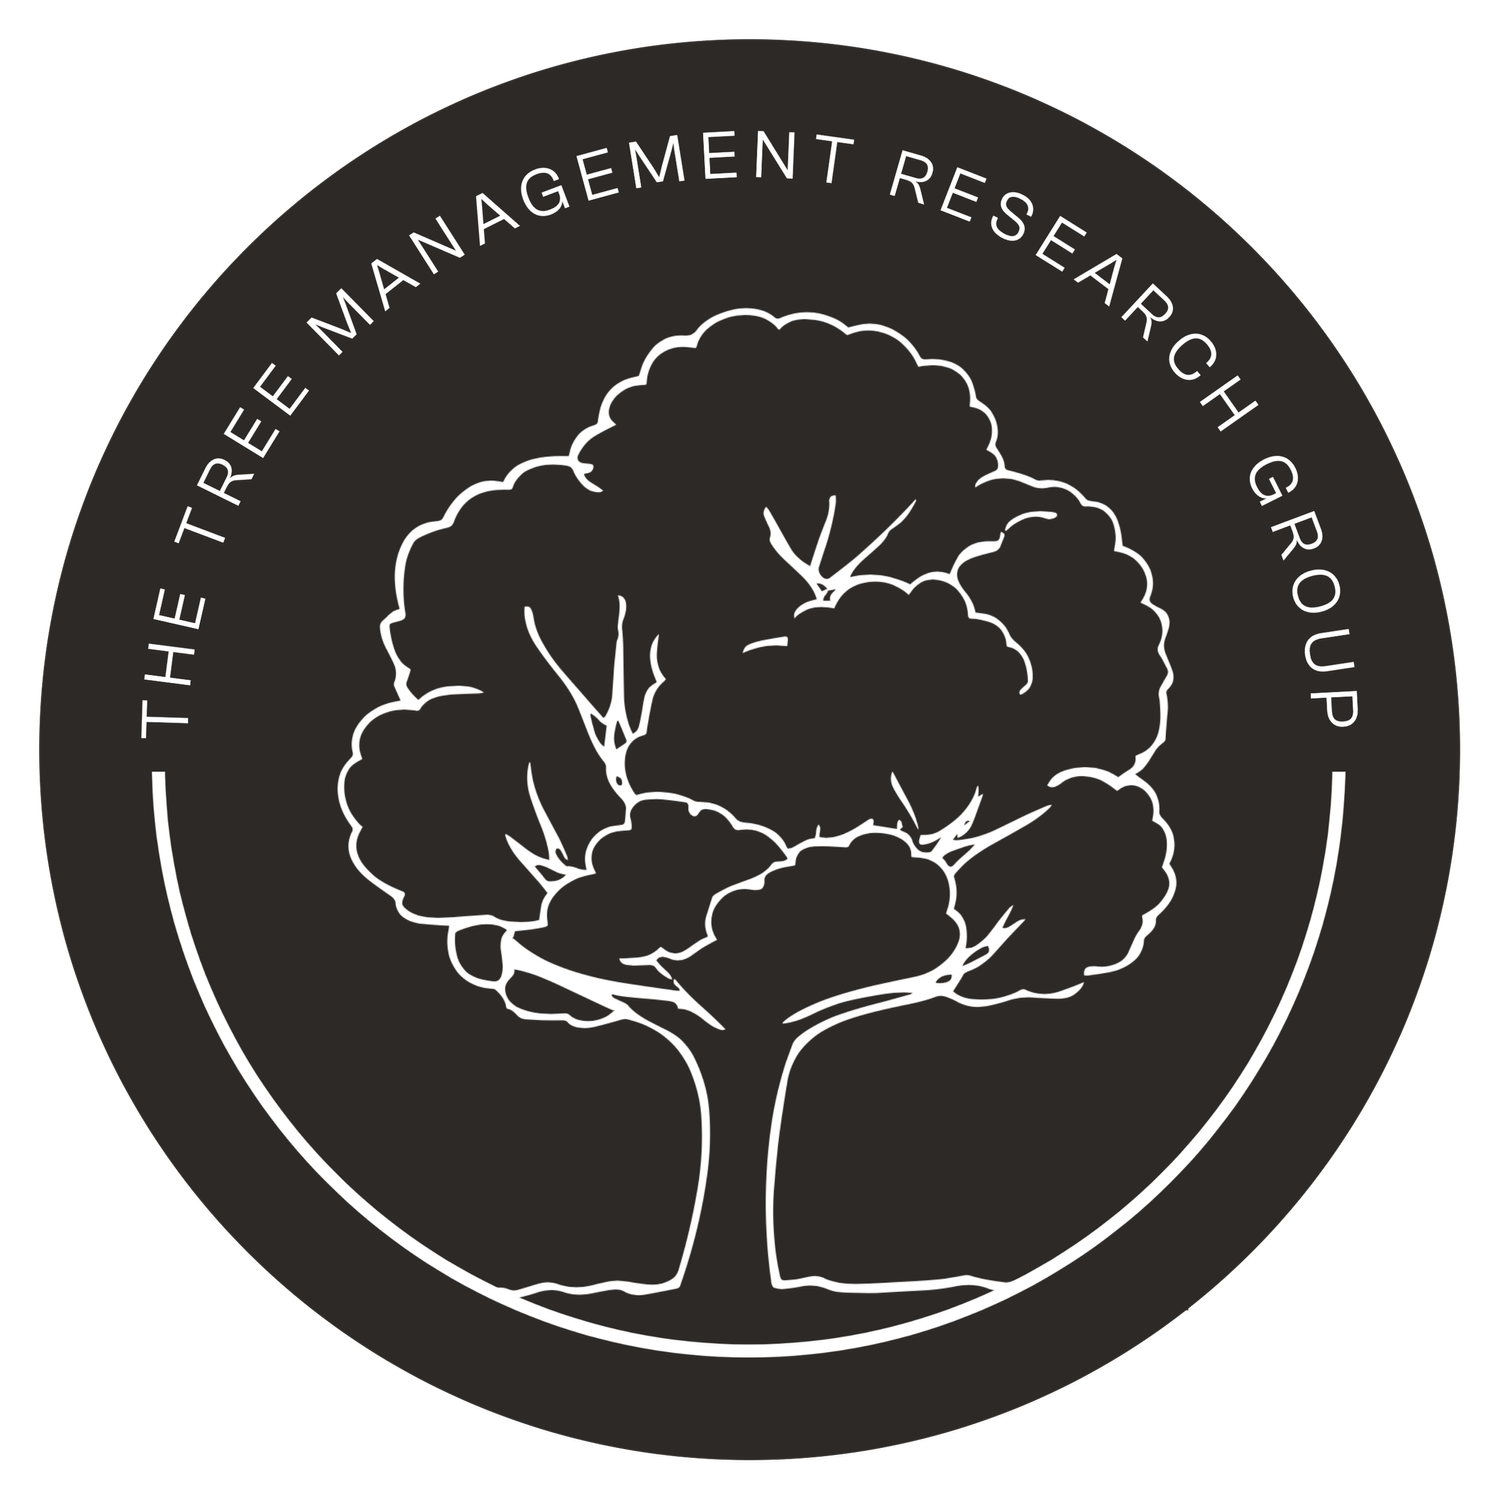 Tree Management Research Group